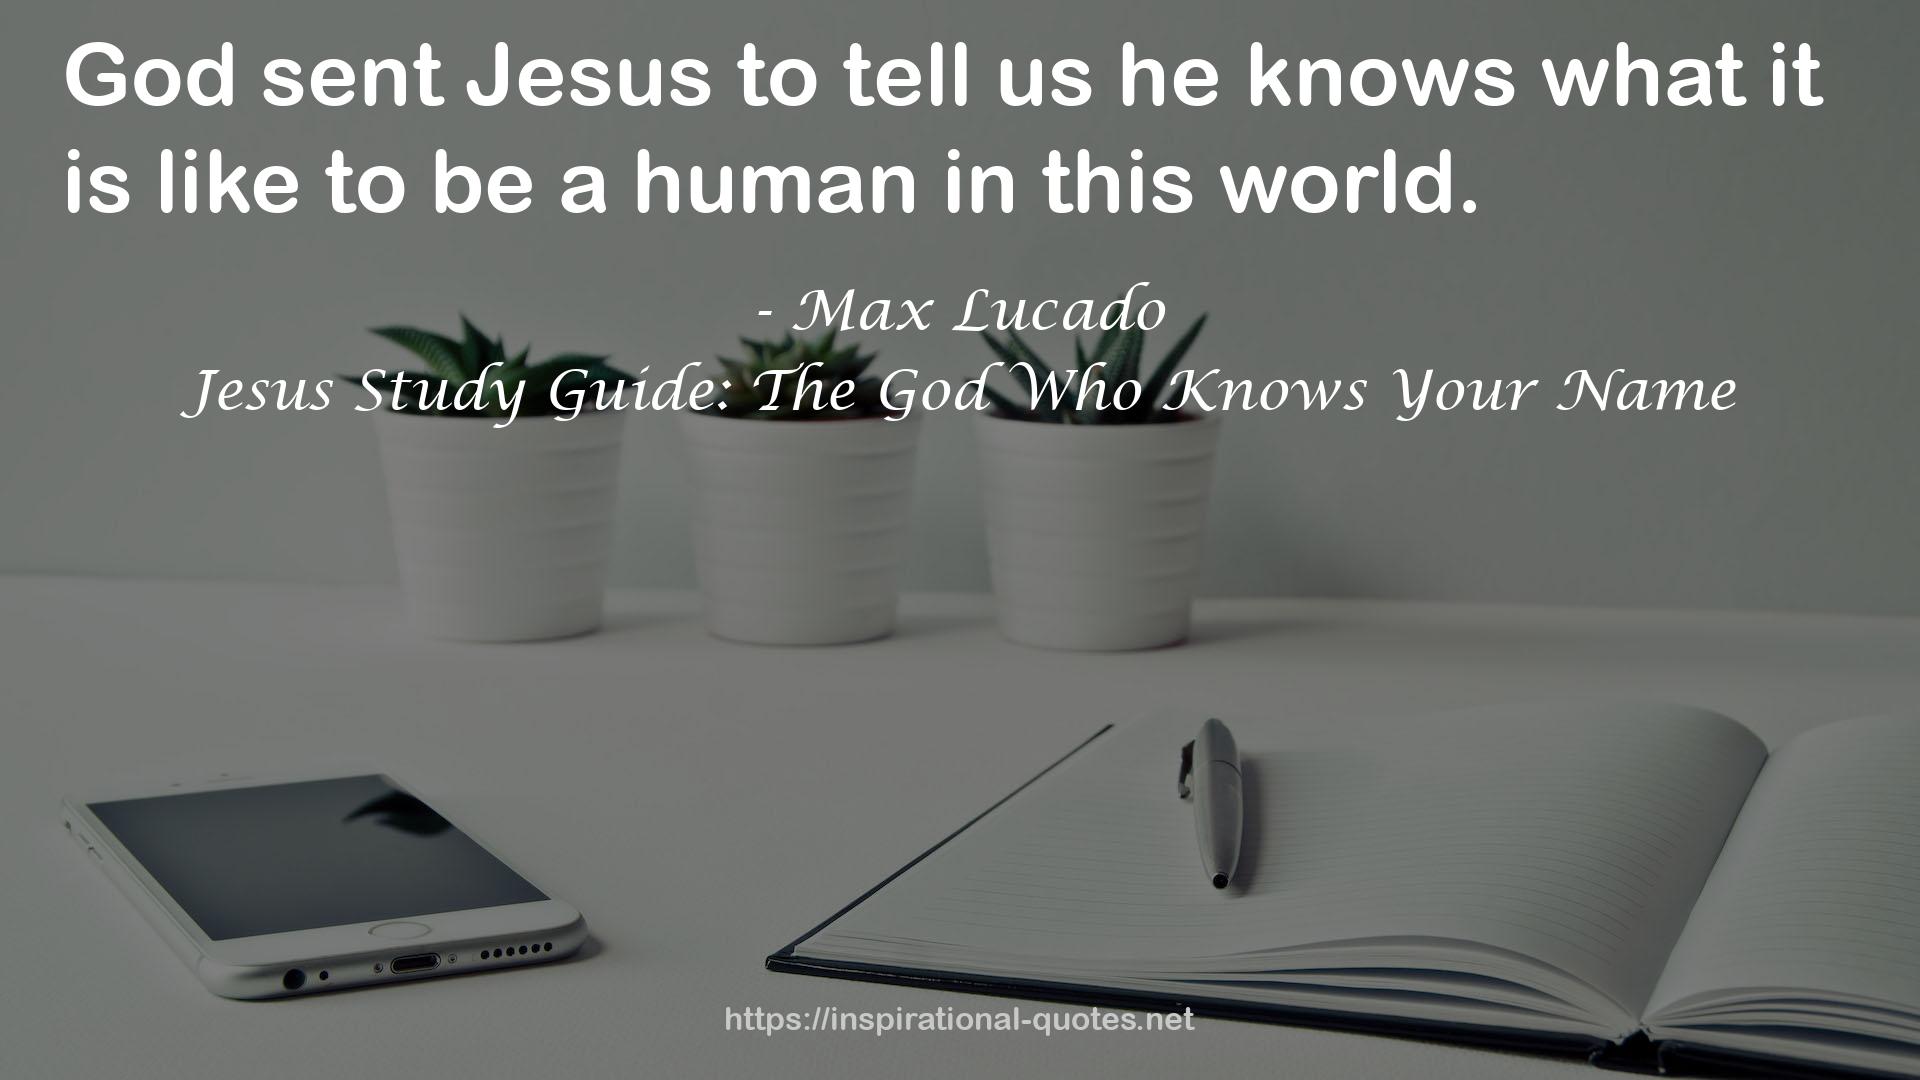 Jesus Study Guide: The God Who Knows Your Name QUOTES